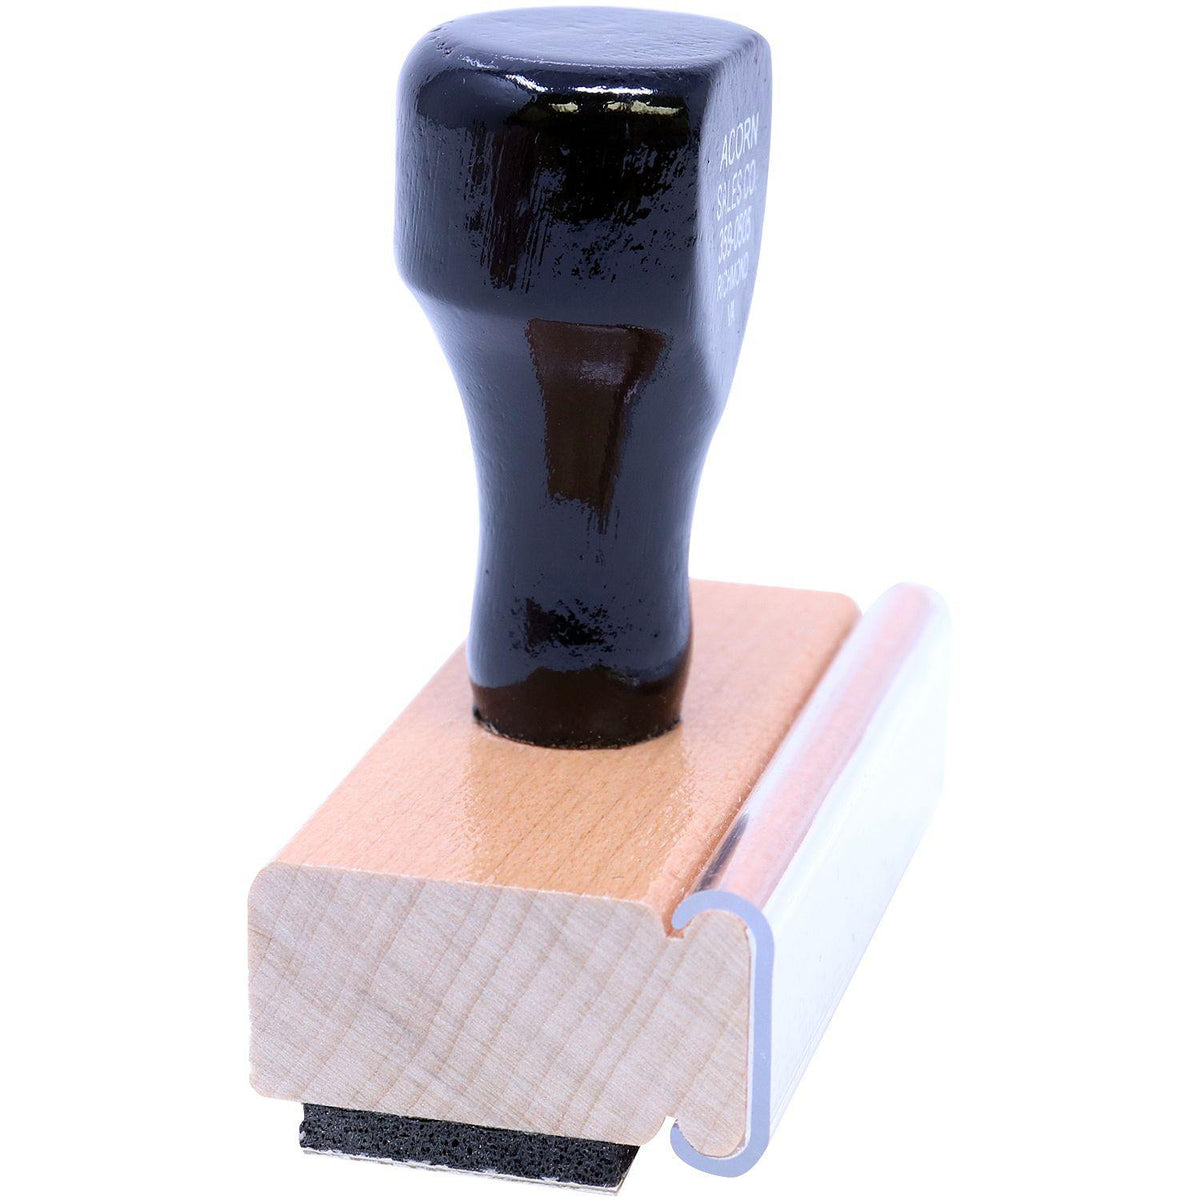 Side View of Large Paid with Checkmark Rubber Stamp at an Angle